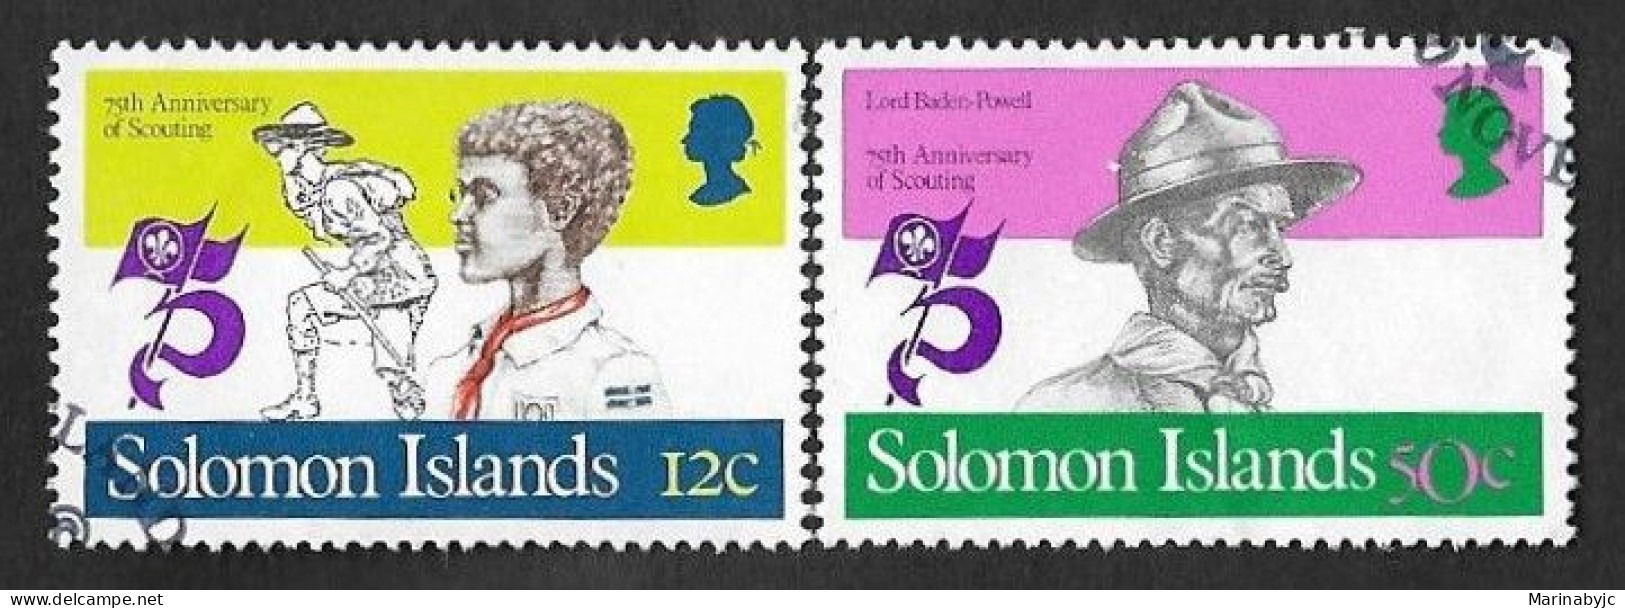 SD)1982 SOLOMON ISLANDS SHORT SERIES 75TH ANNIVERSARY OF SCOUTING, BOY IN BRIGADE AND BADEN POWELL, 2 USED STAMPS - Salomon (Iles 1978-...)